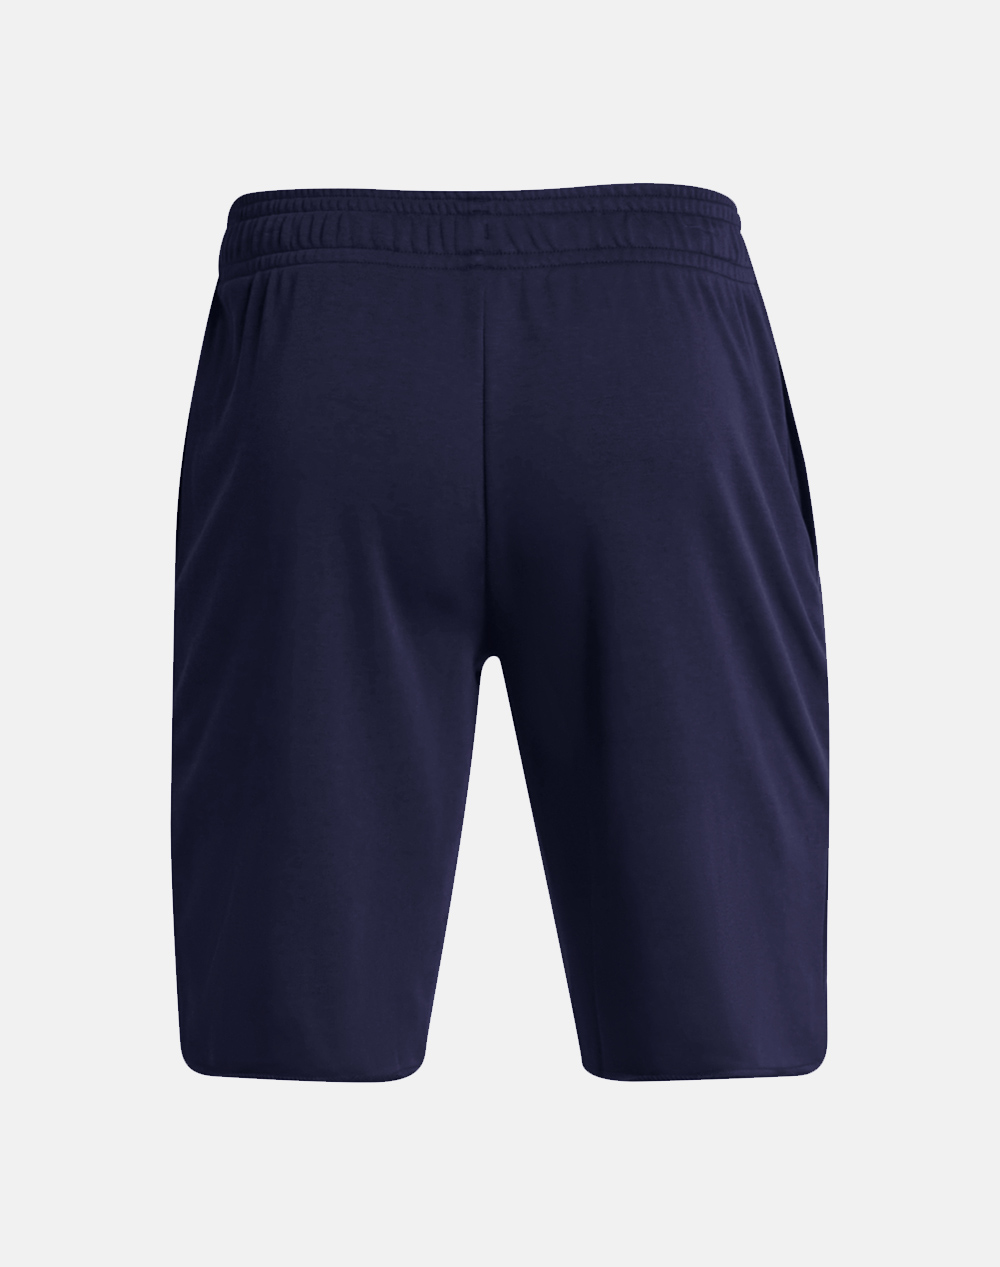 UNDER ARMOUR UA RIVAL TERRY SHORT